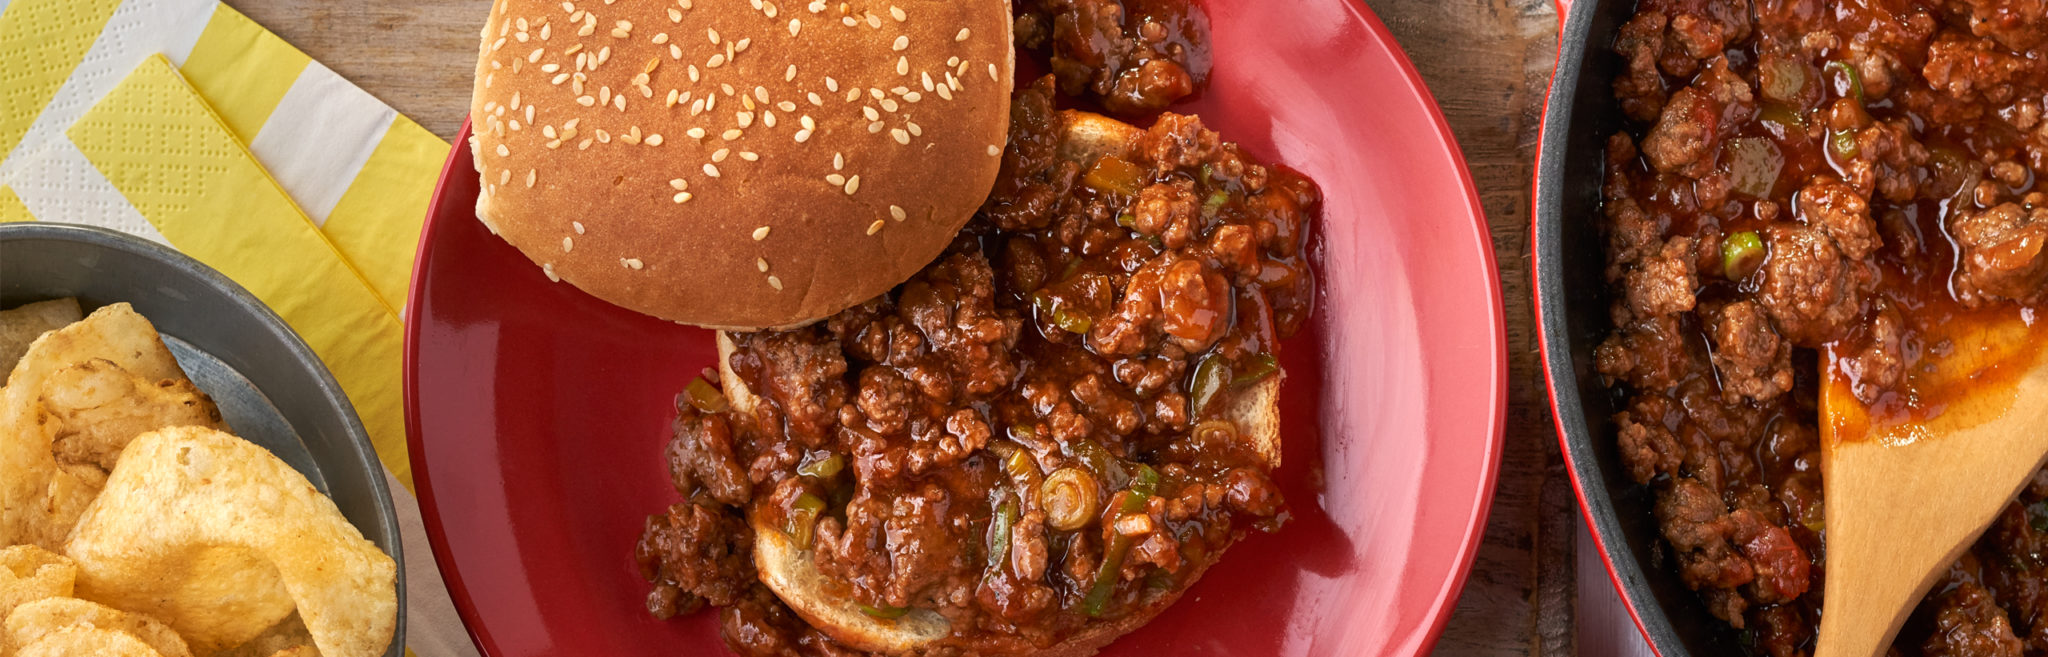 Picante Sloppy Joes Pace Foods